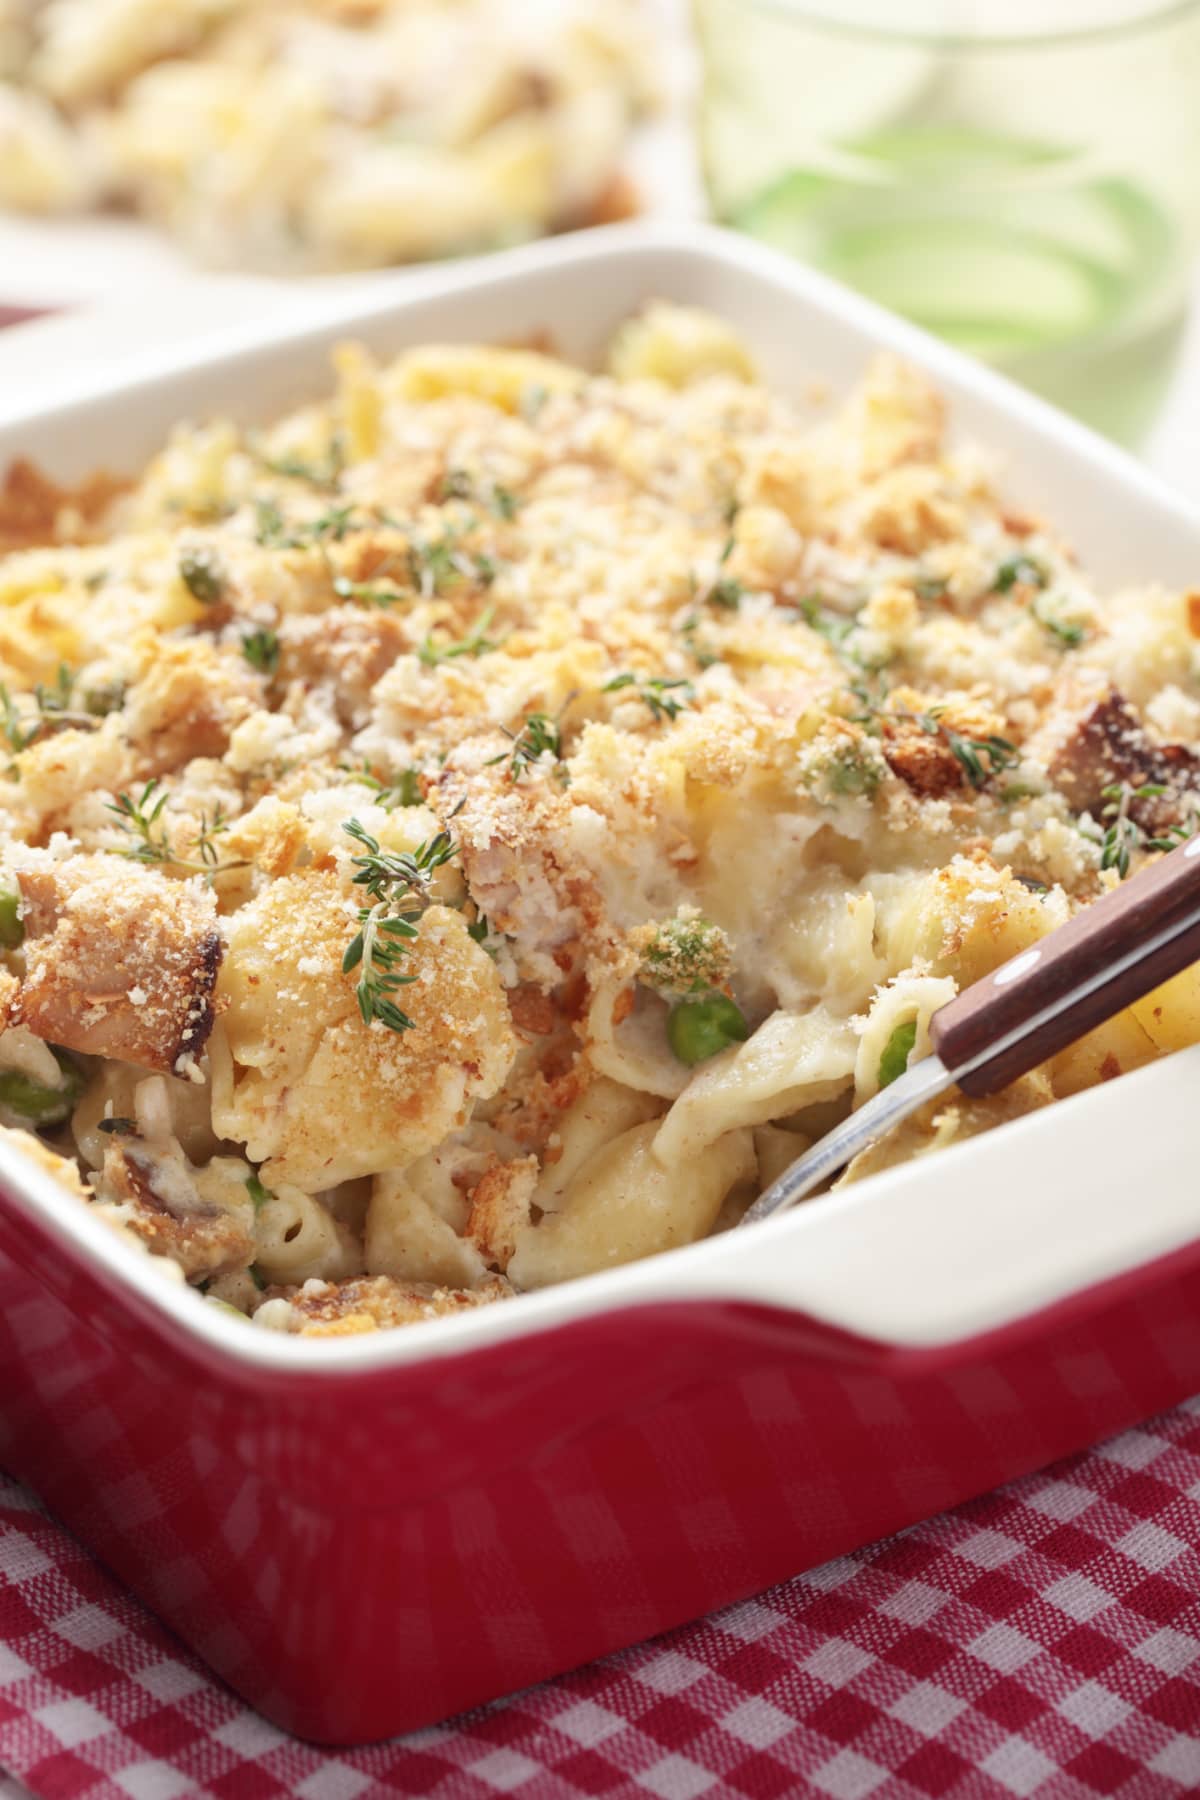 Tuna casserole with pasta and crumbs